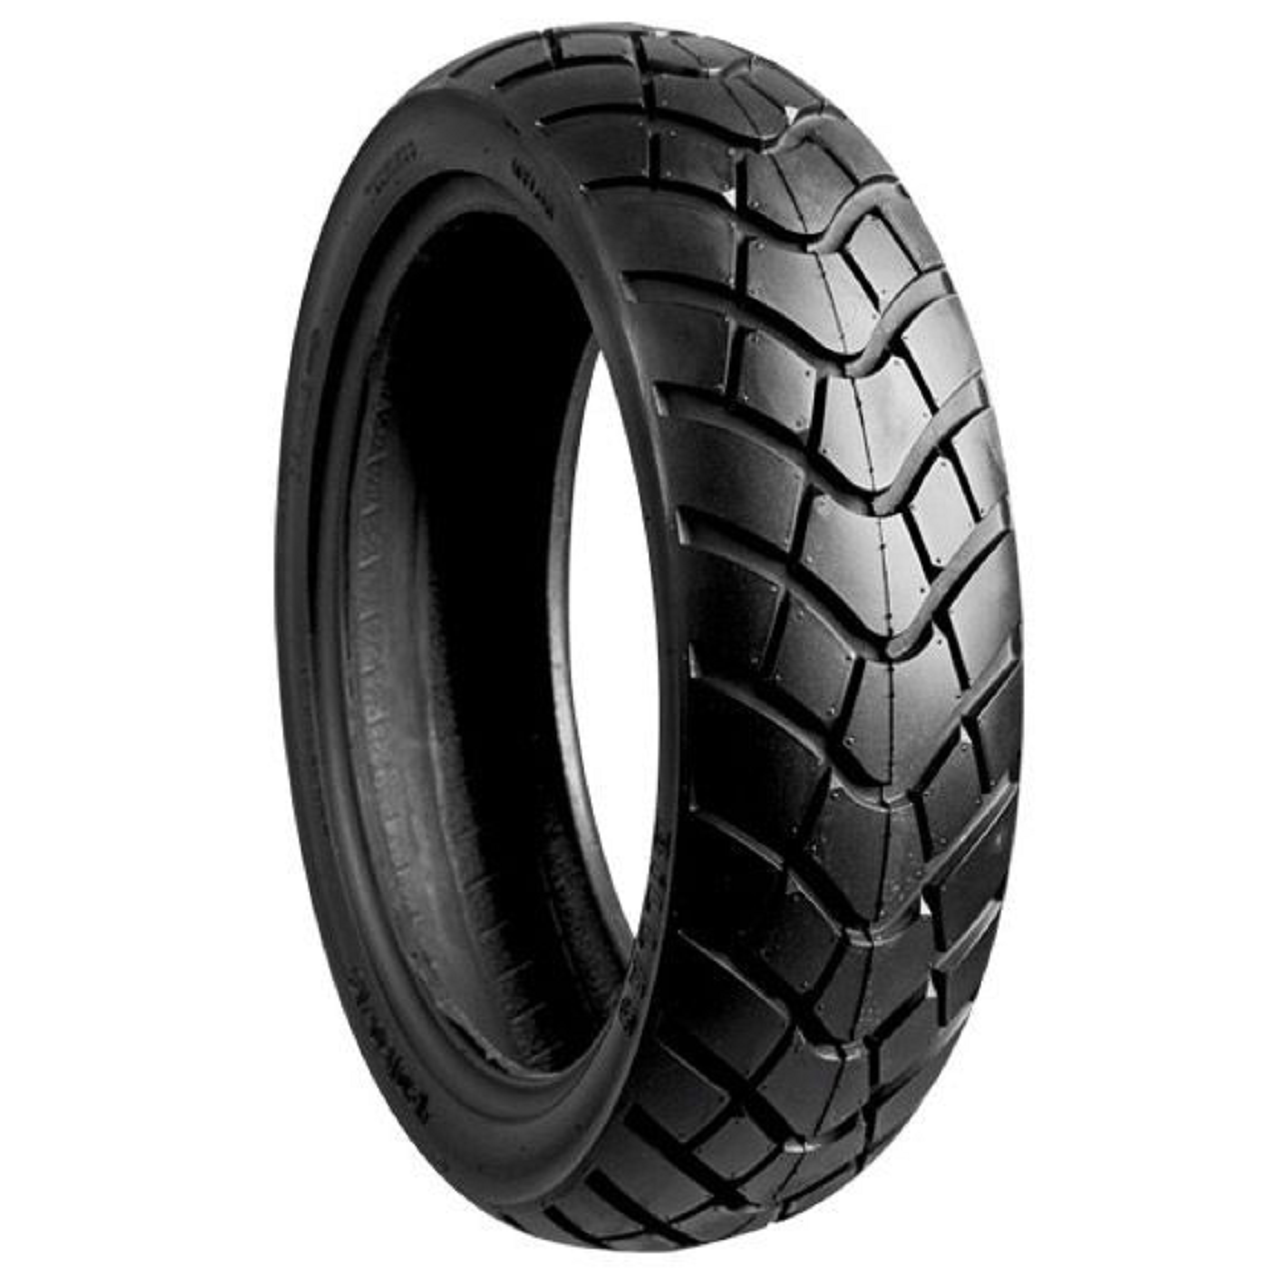 Б 110 90 б. Duro 130/60-13. Duro 110 90 r13. Dunlop 130/60 21. E Scooters lastik.